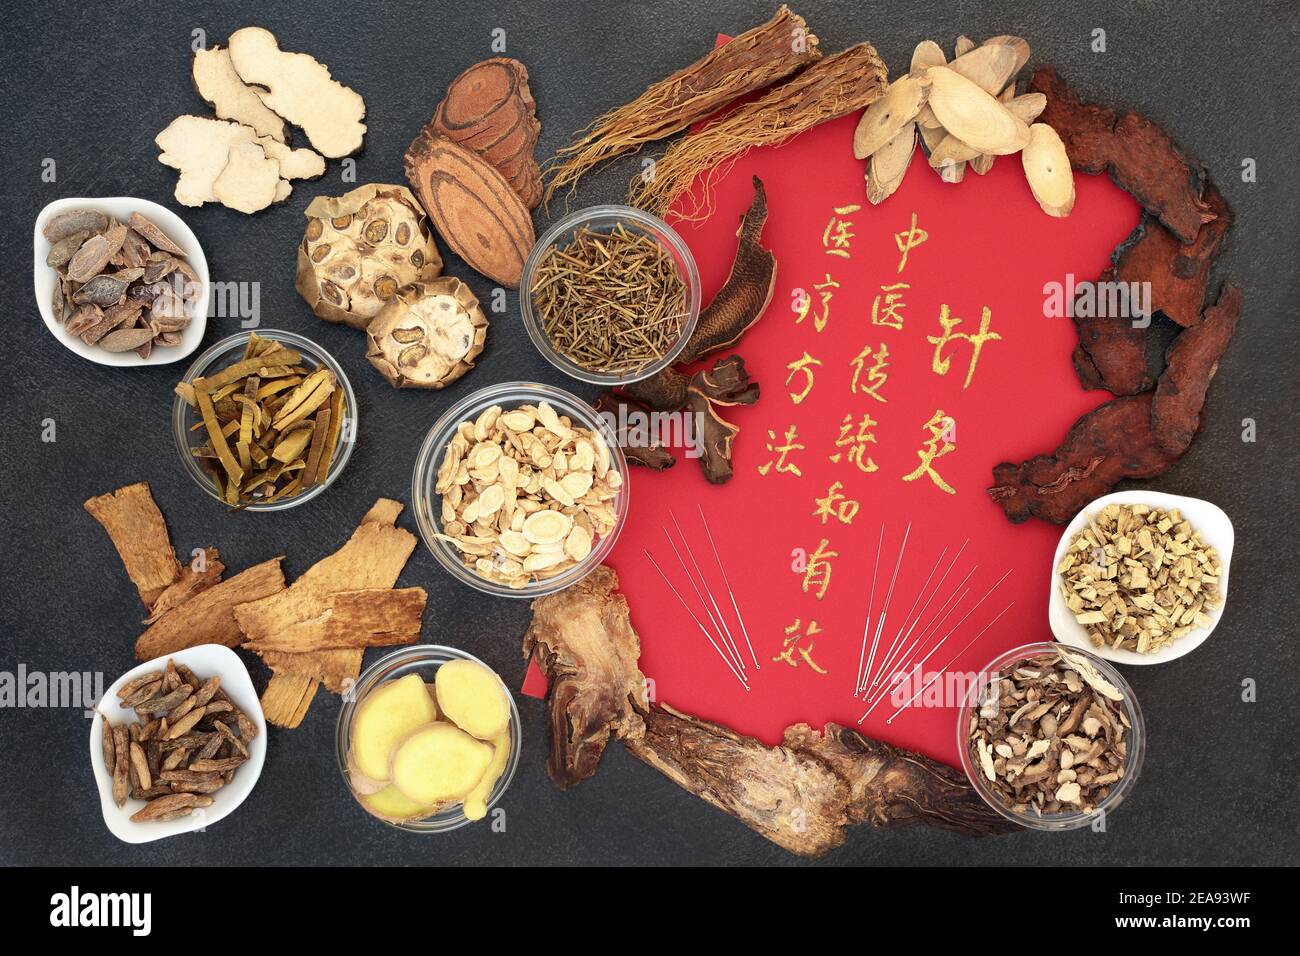 Traditional chinese herbal medicine with herbs, acupuncture needles & calligraphy script. Health care concept. Stock Photo